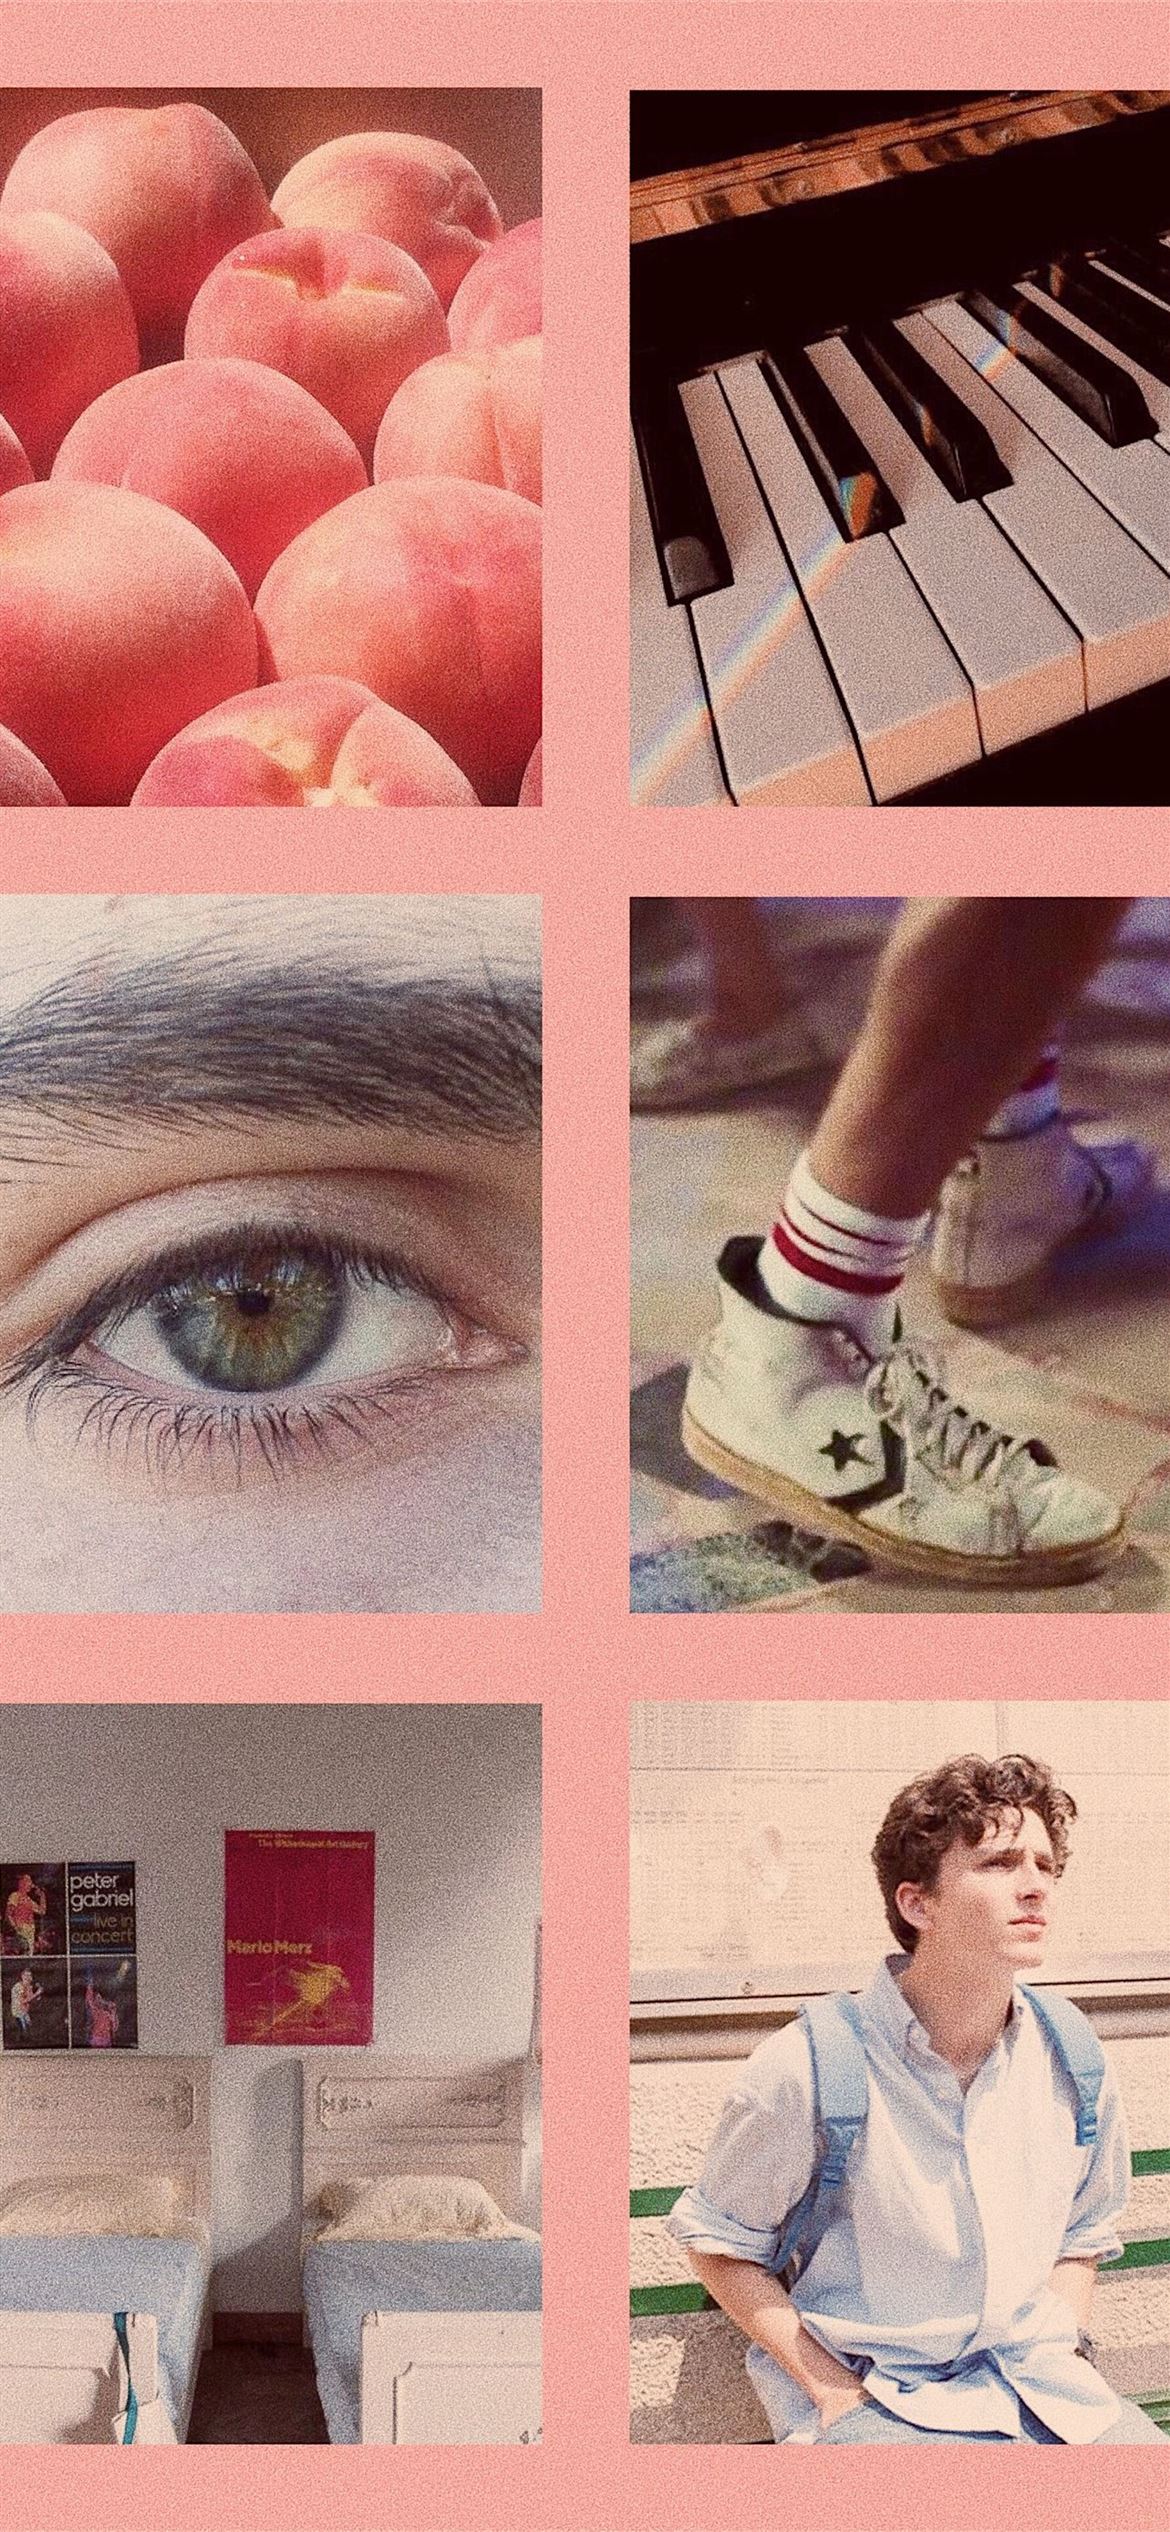 Call Me By Your Name Wallpapers